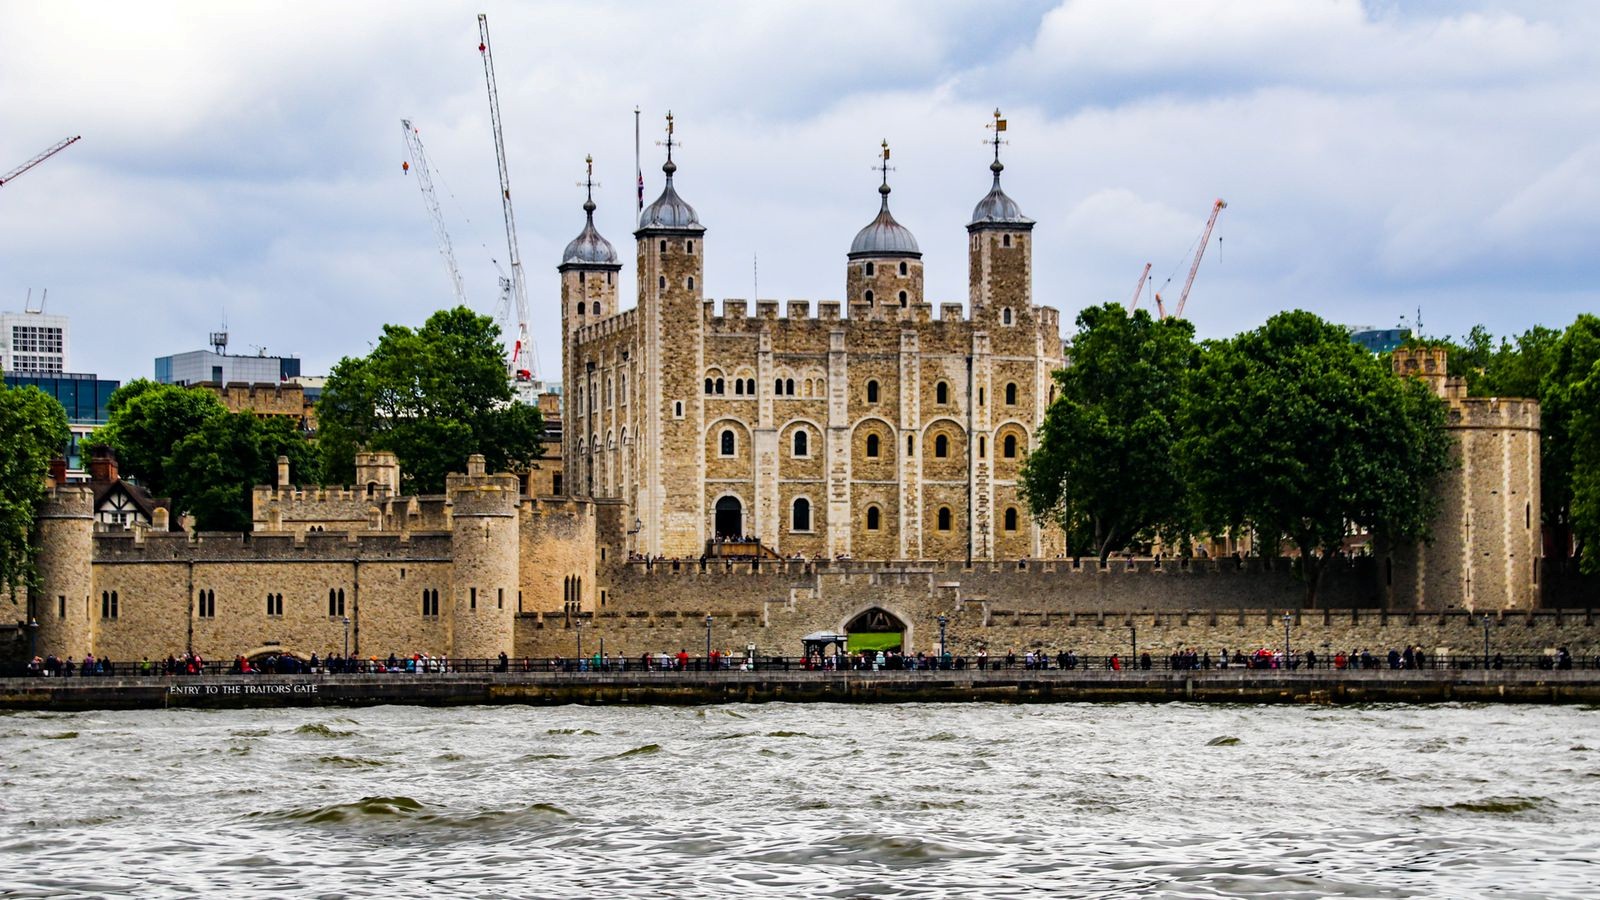 Visiting Place Tower Of London Castle In London - Tower Of London - HD Wallpaper 